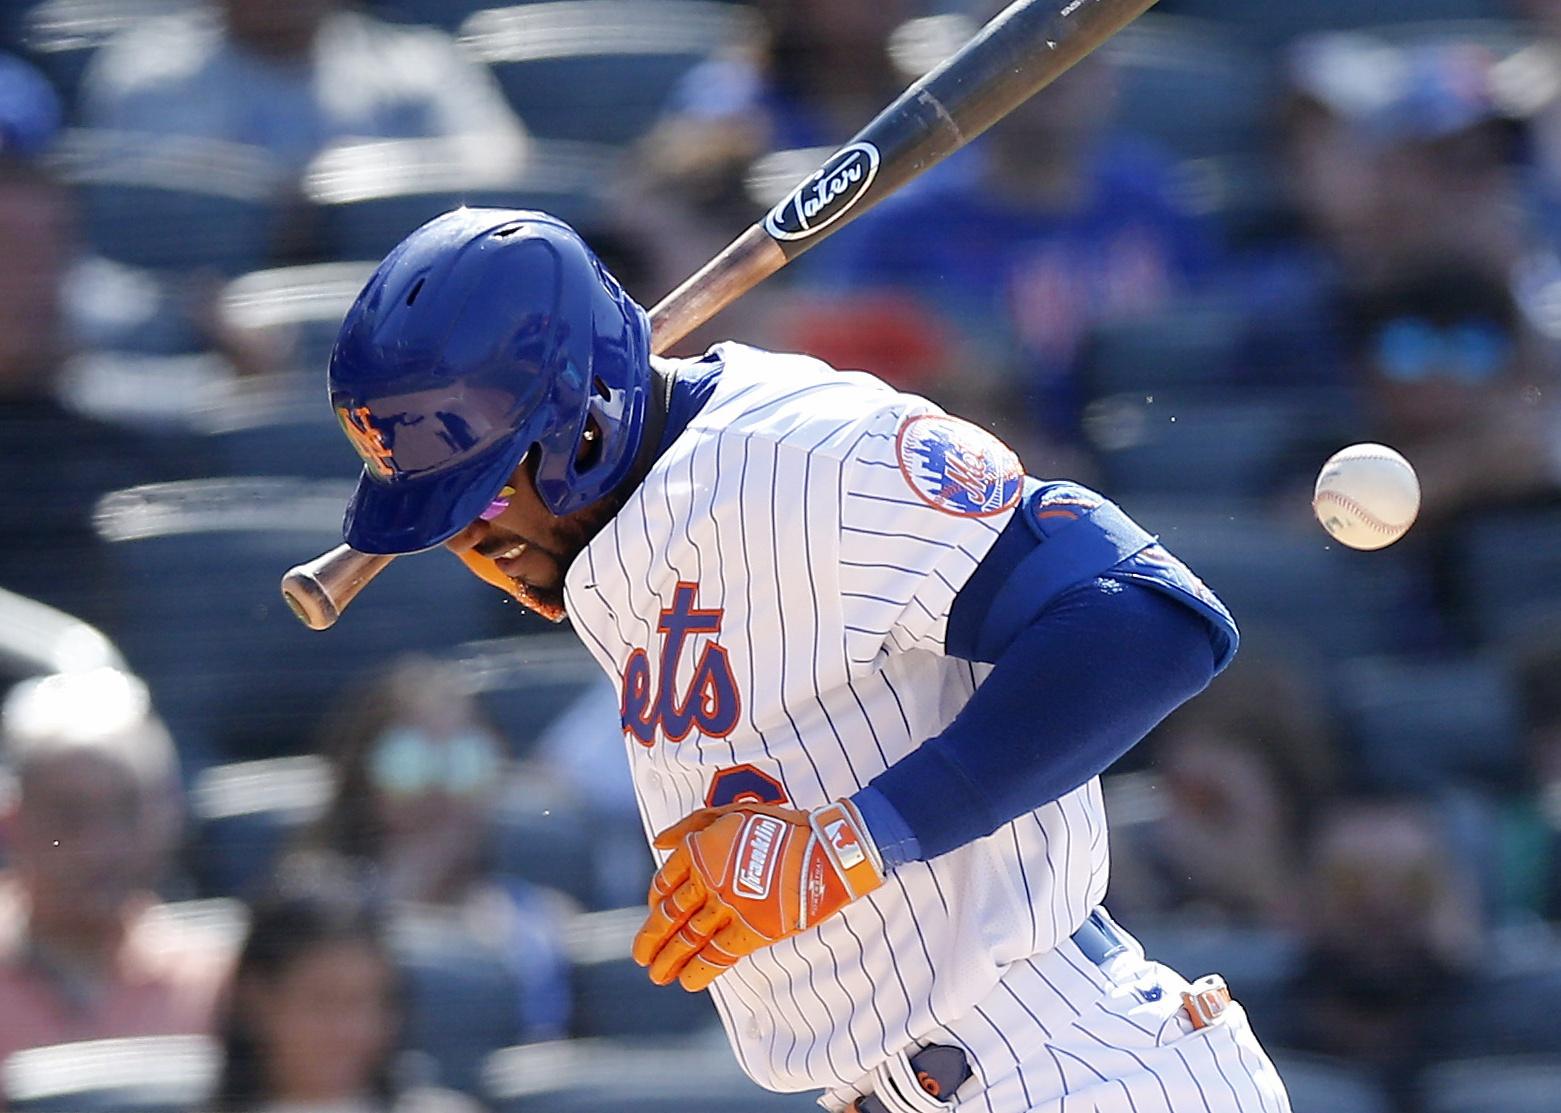 Starling Marte of the New York Mets is hit by a pitch/